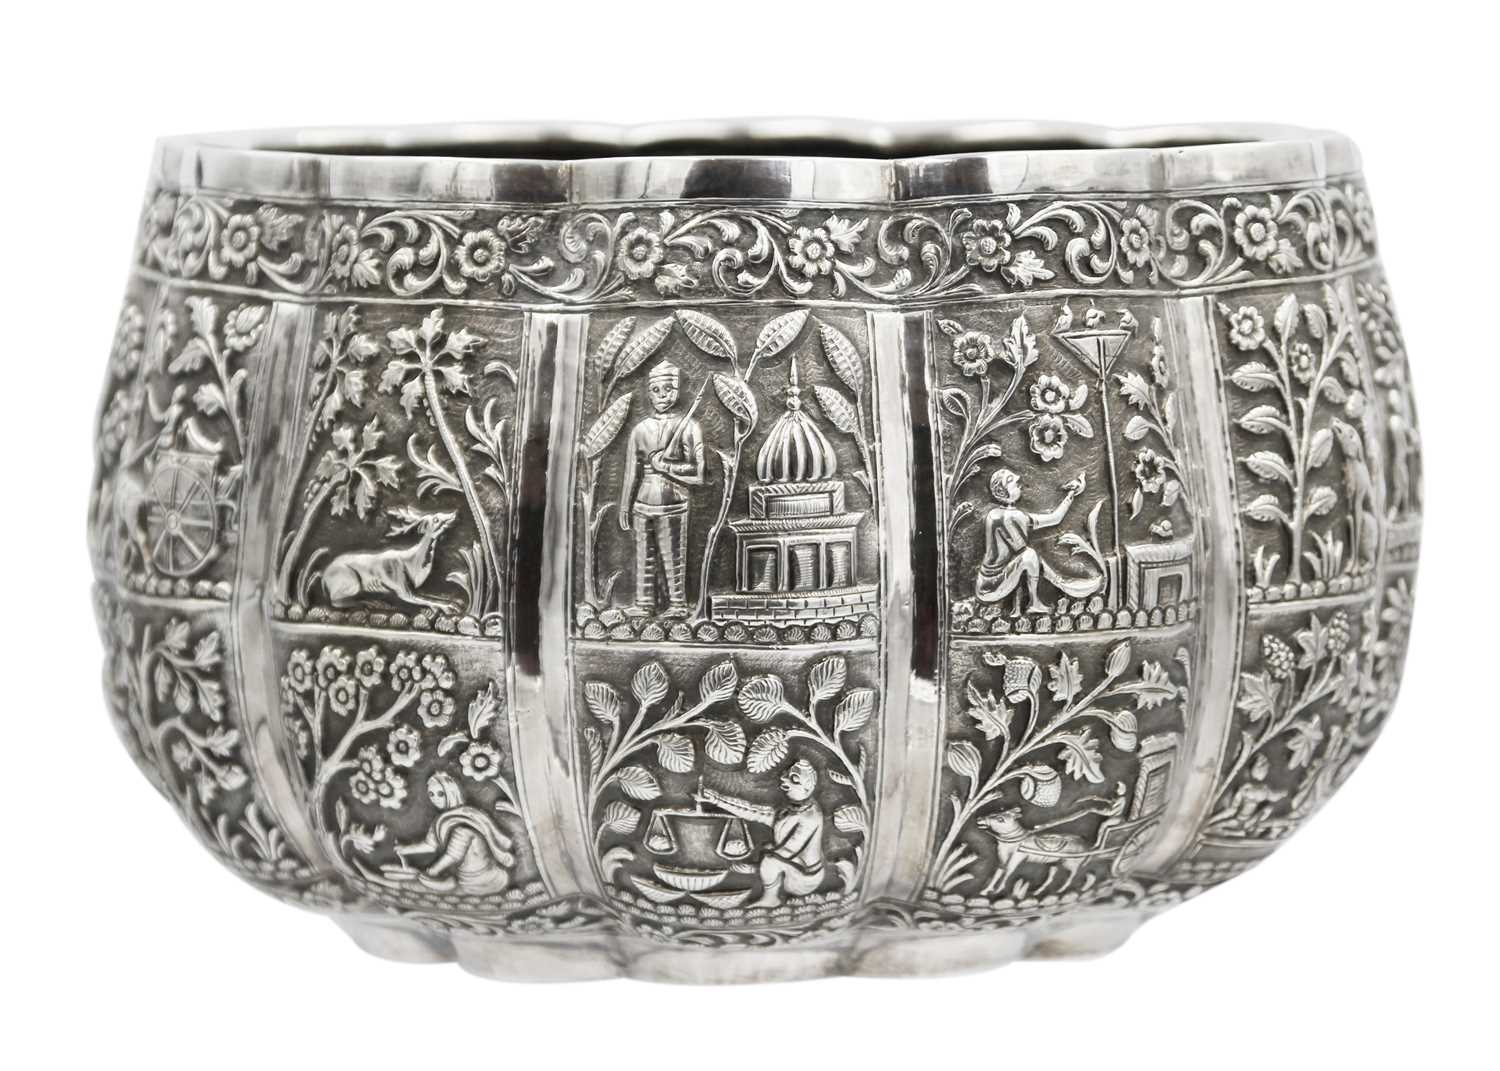 A Burmese silver thabeik lobed bowl, early 20th century. - Image 5 of 6